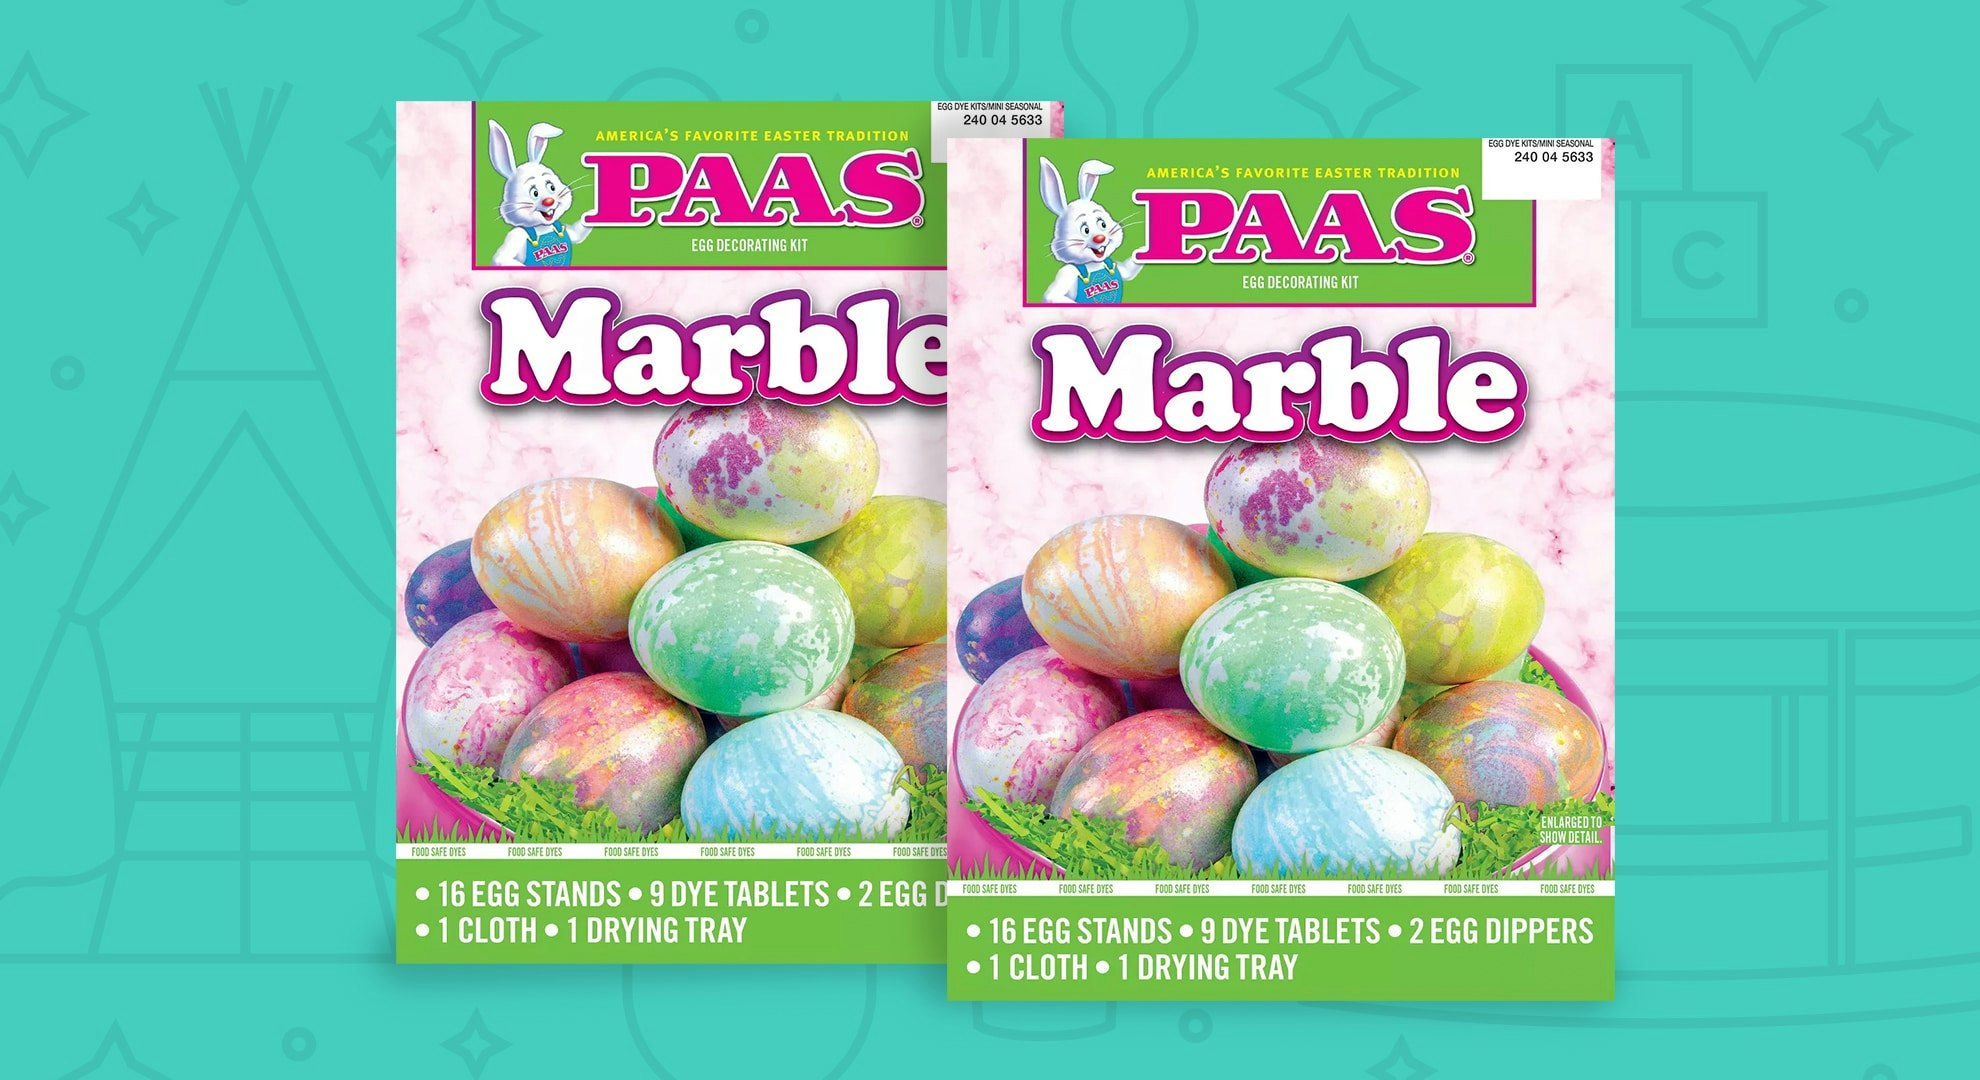 TIE DYE PAAS EASTER EGG COLORING KIT DELUXE CLASSIC, 1 1 1 LOT OF 3. NEW